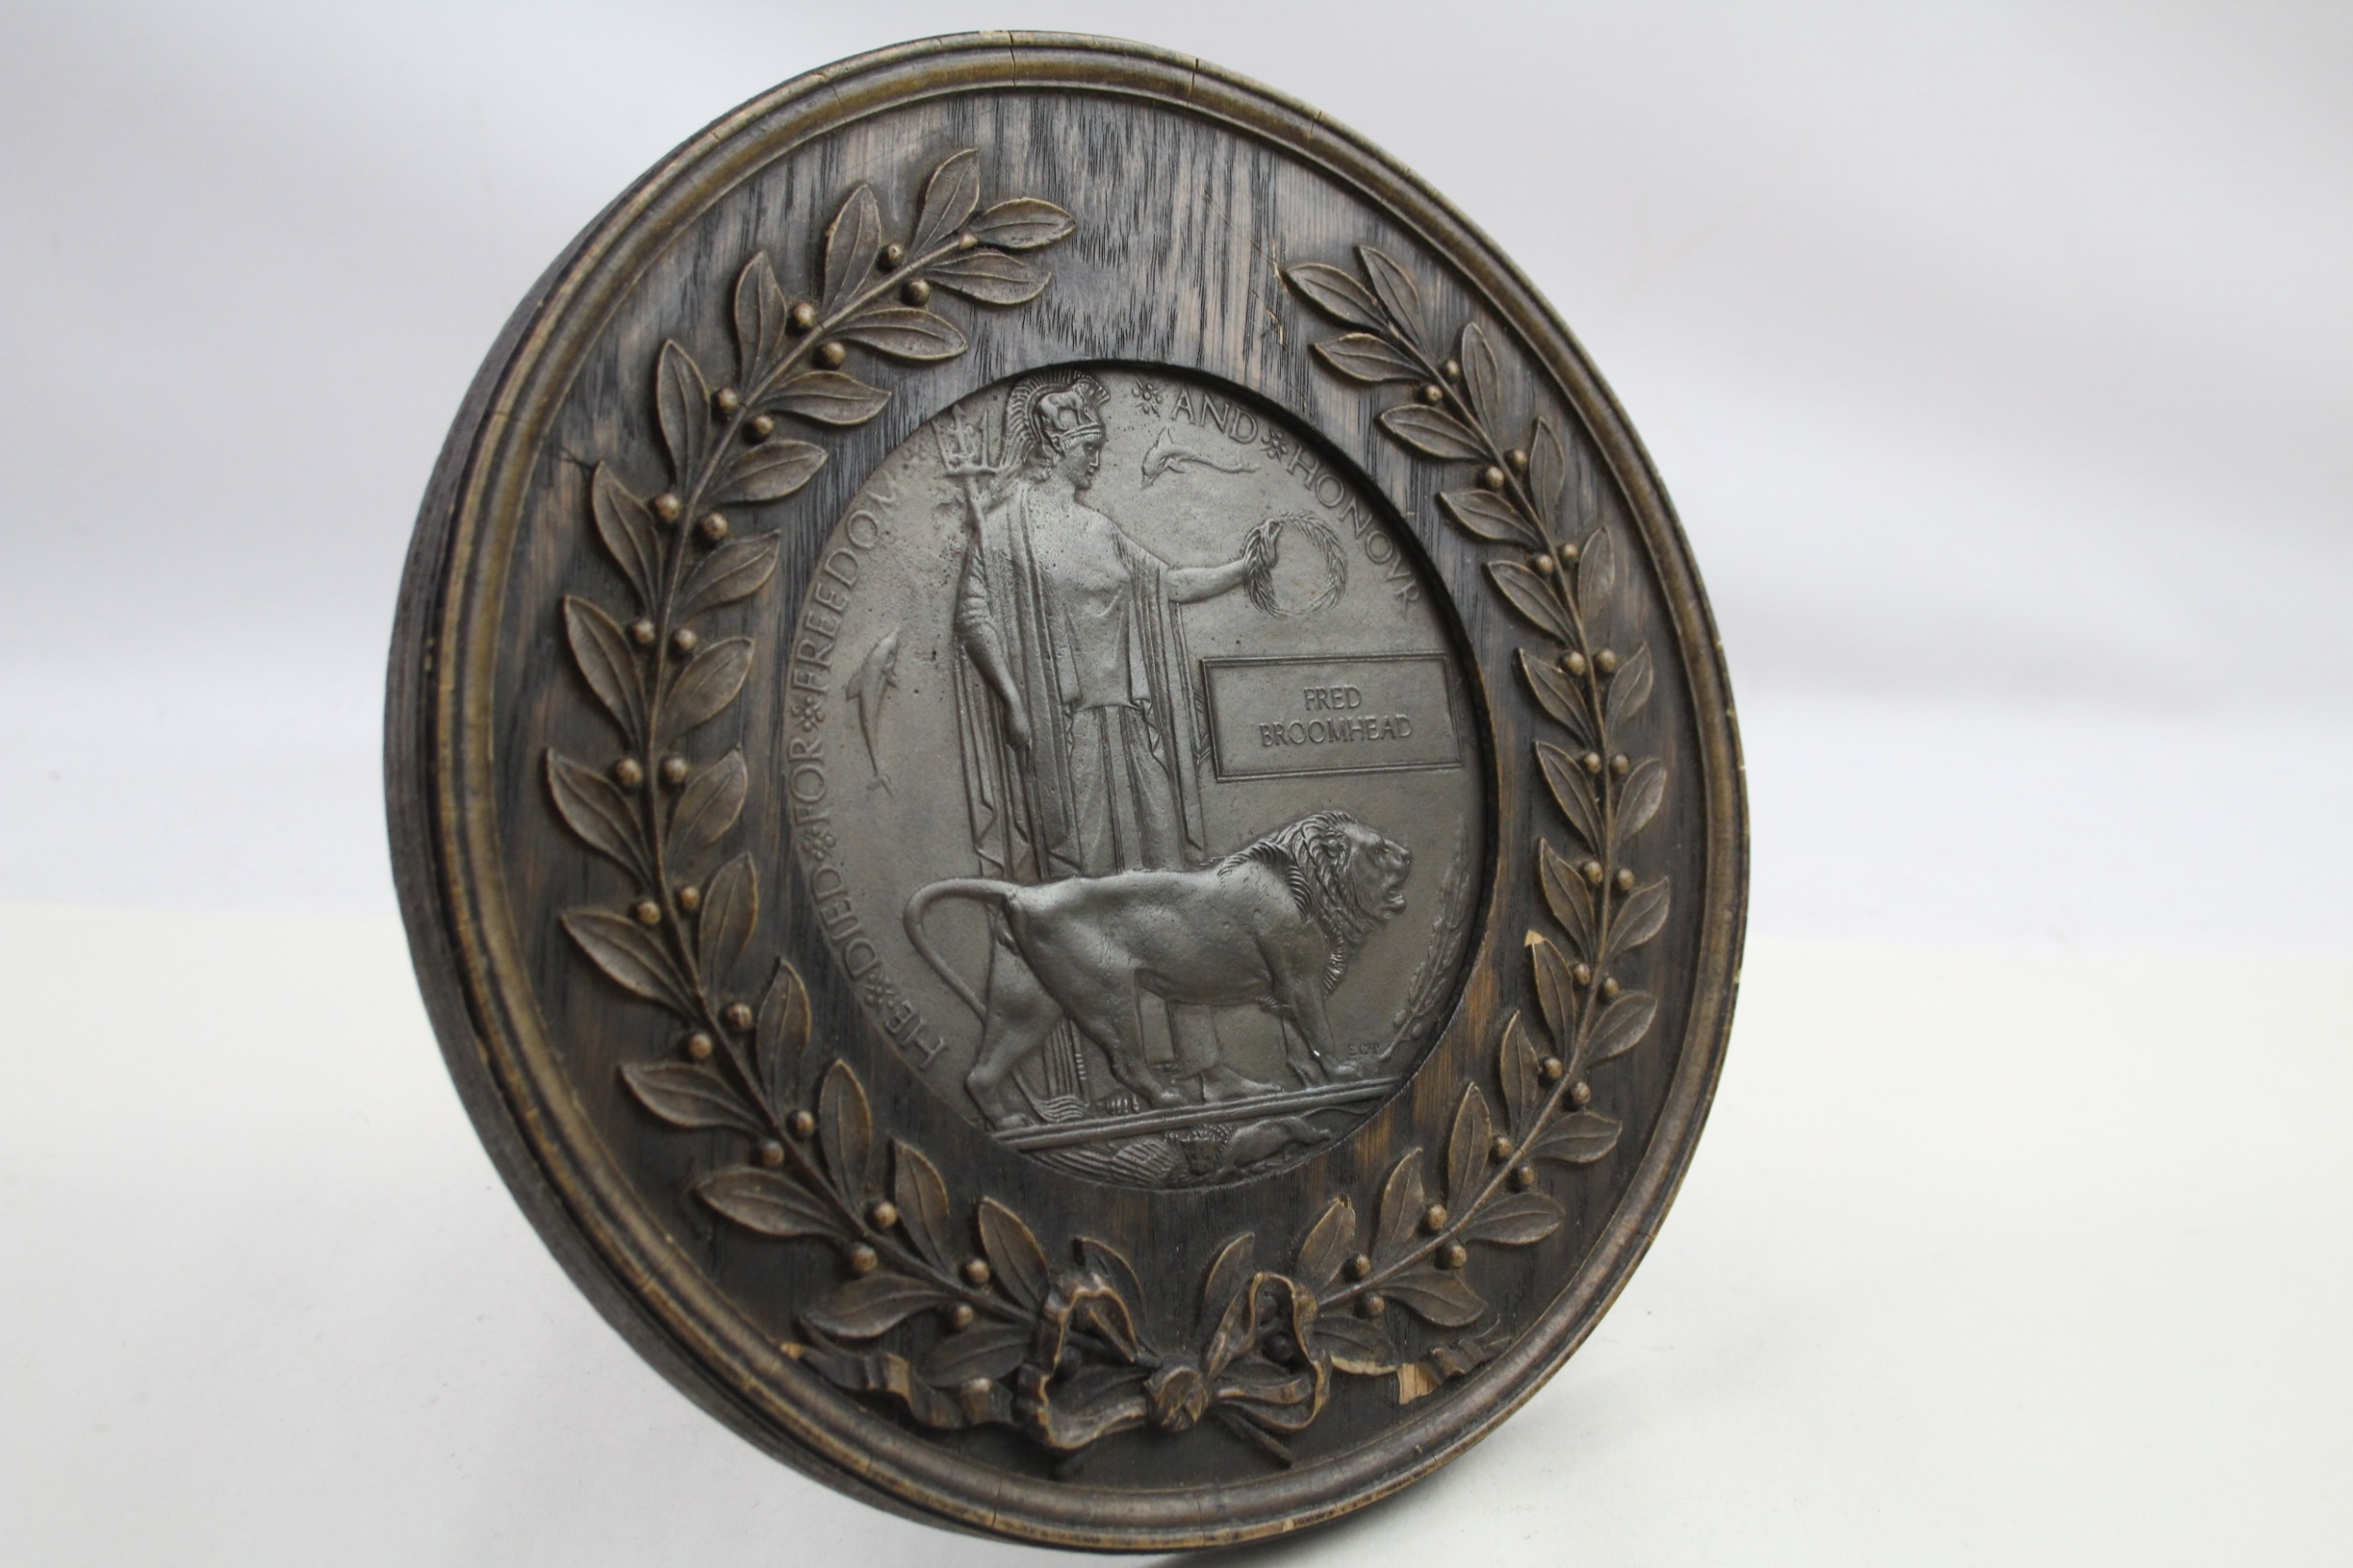 WW1 Death Plaque Mounted in Wooden Frame, Named Fred Broomhead - Image 6 of 7